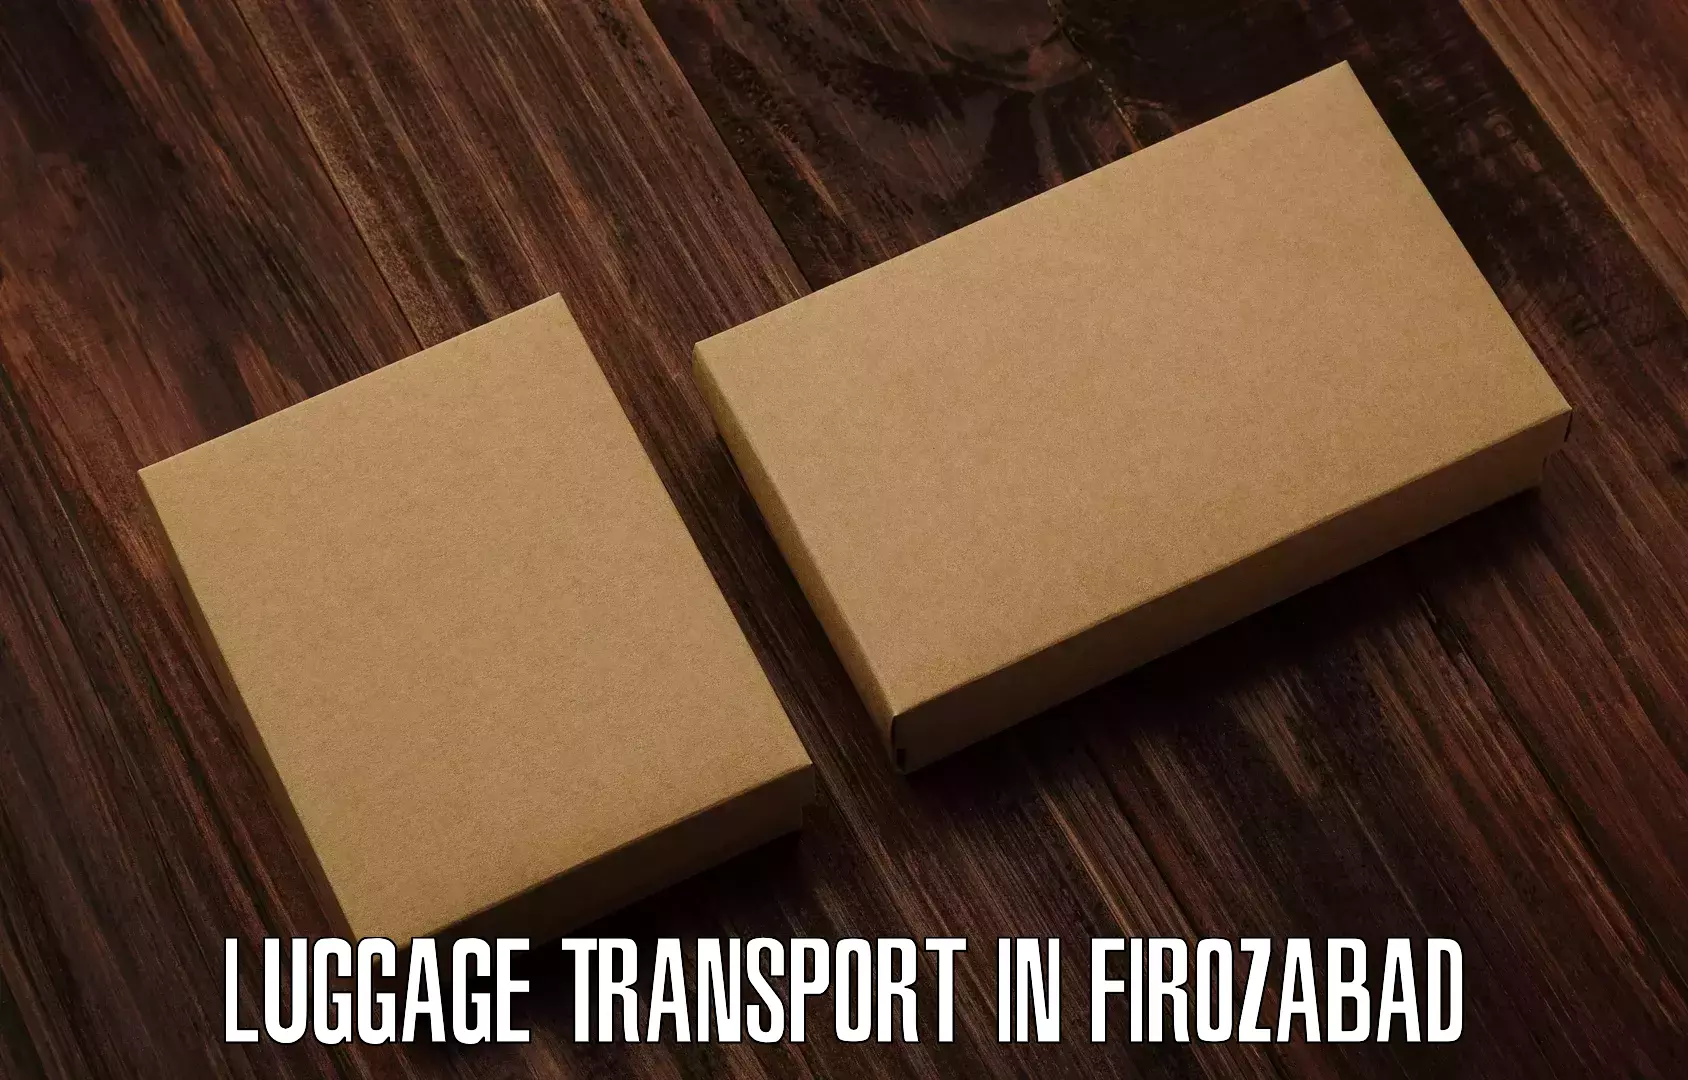 Luggage transport service in Firozabad